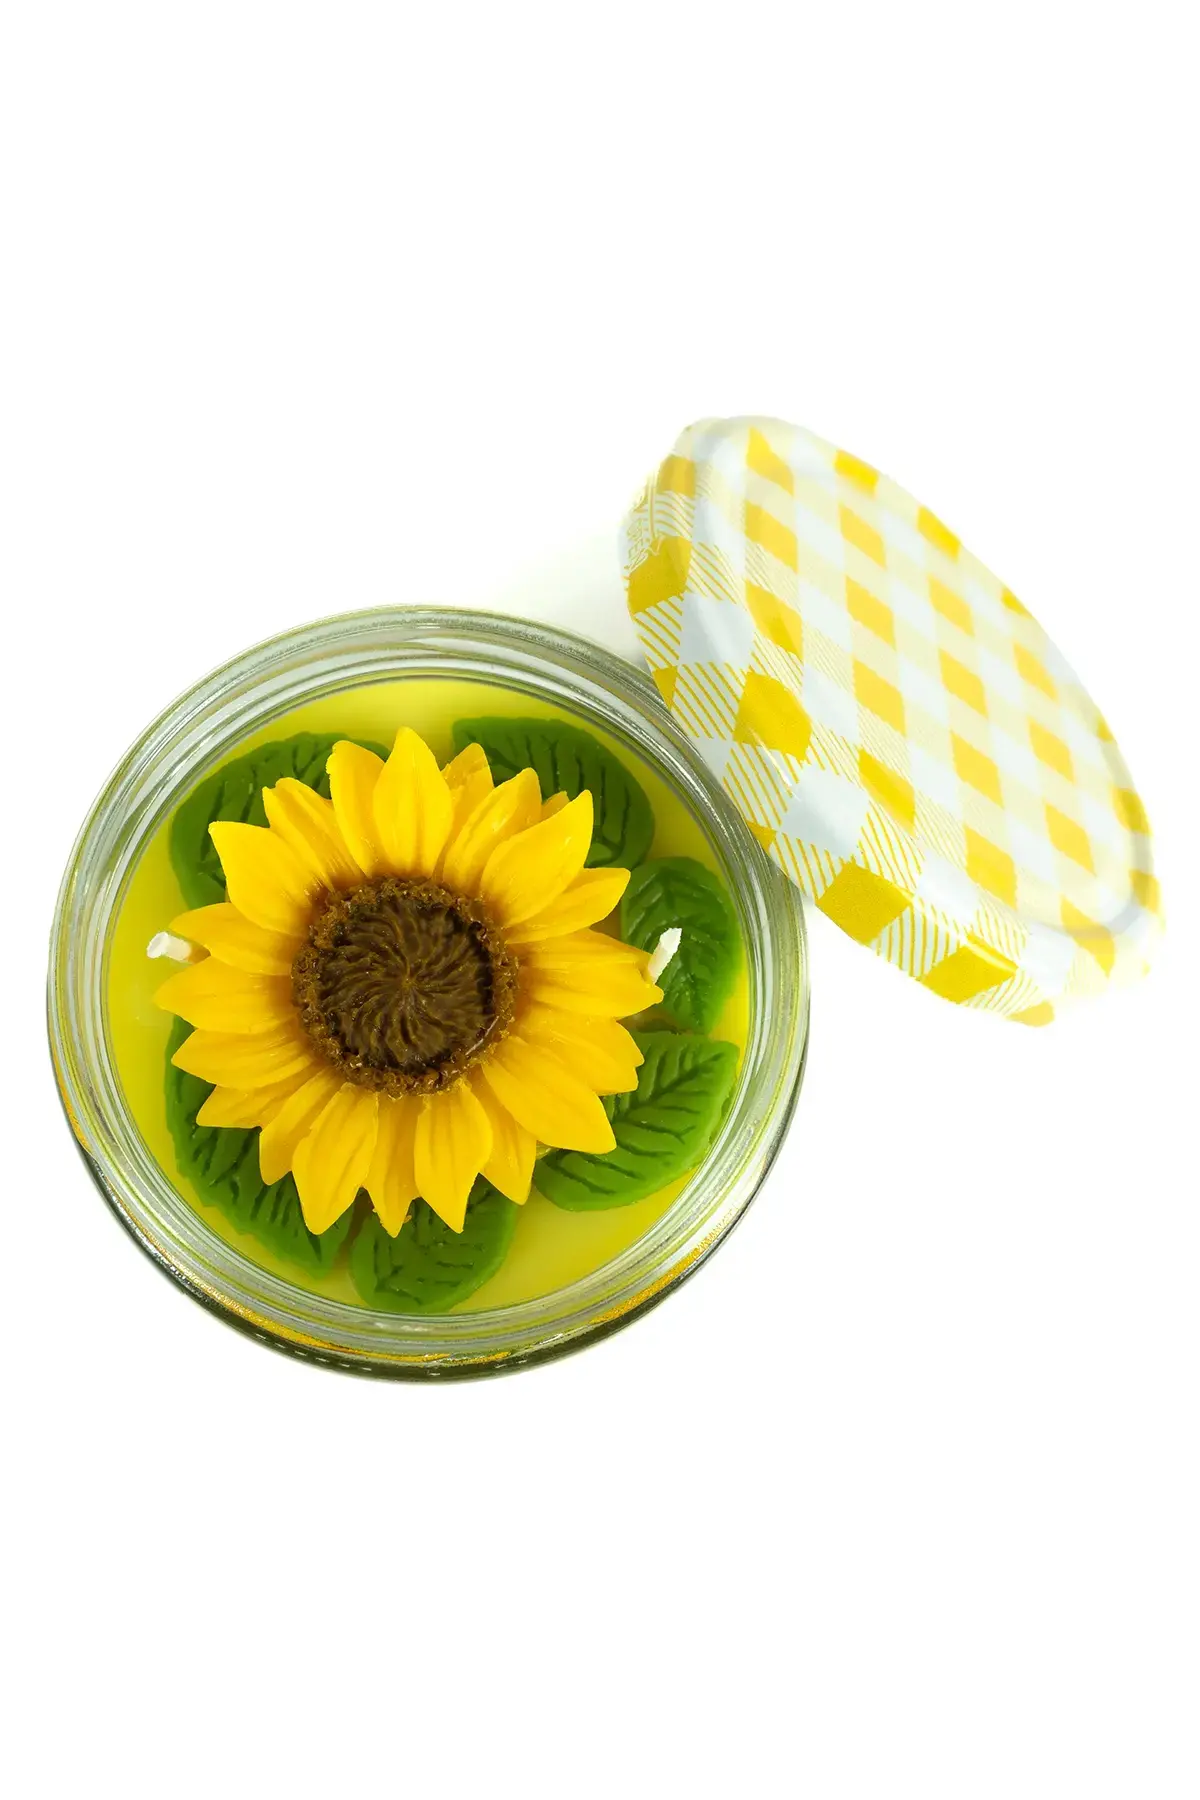 HERBAL HOME Sunflower Candle 220 GR - 3